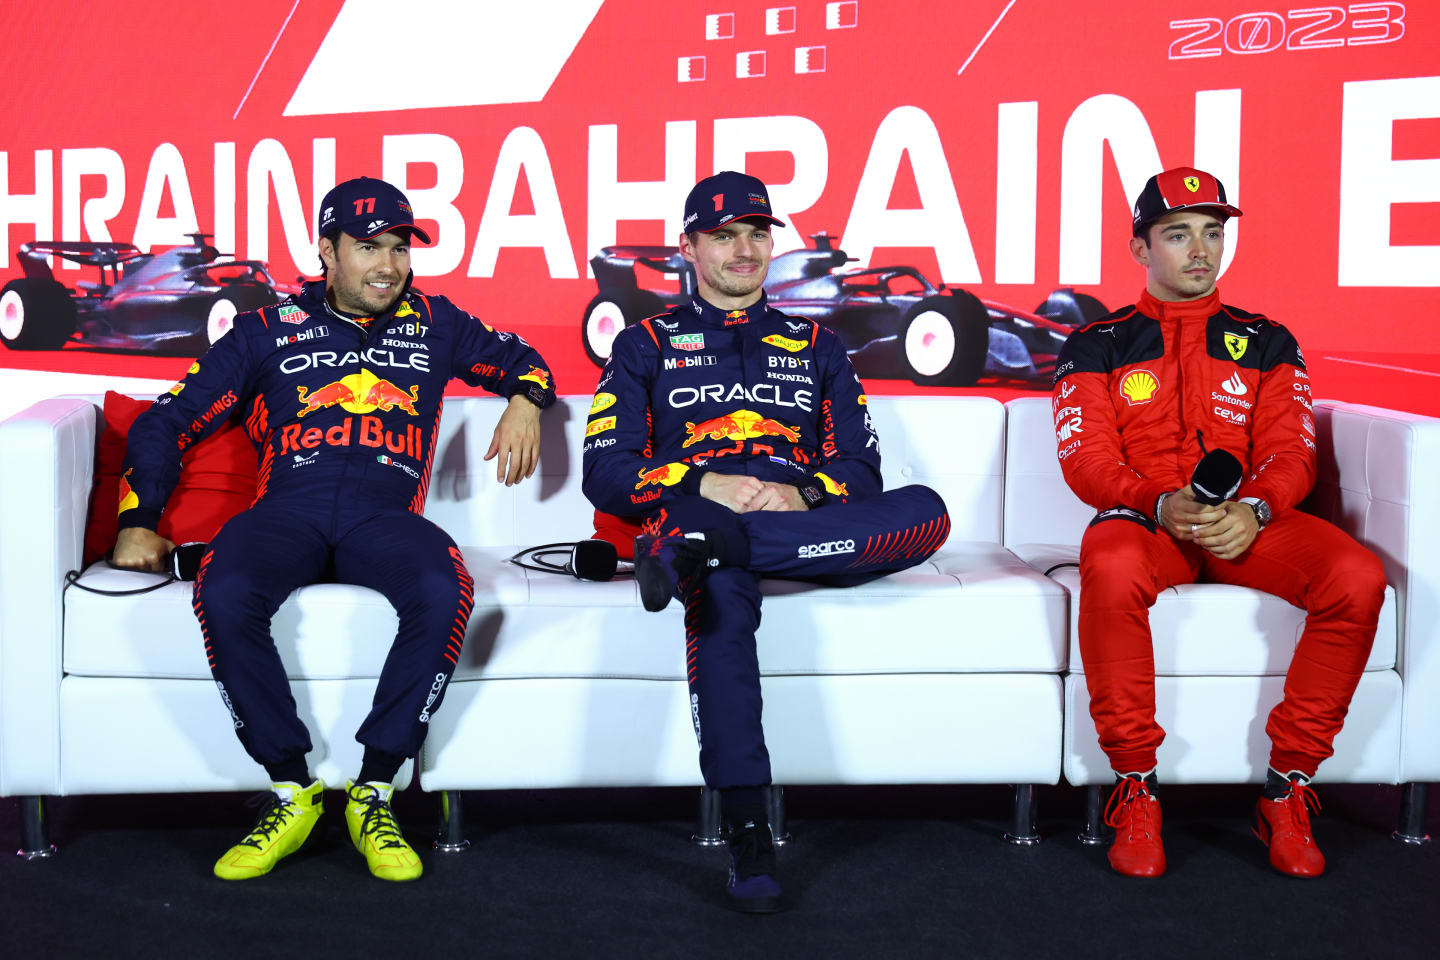 BAHRAIN, BAHRAIN - MARCH 04: Pole position qualifier Max Verstappen of the Netherlands and Oracle